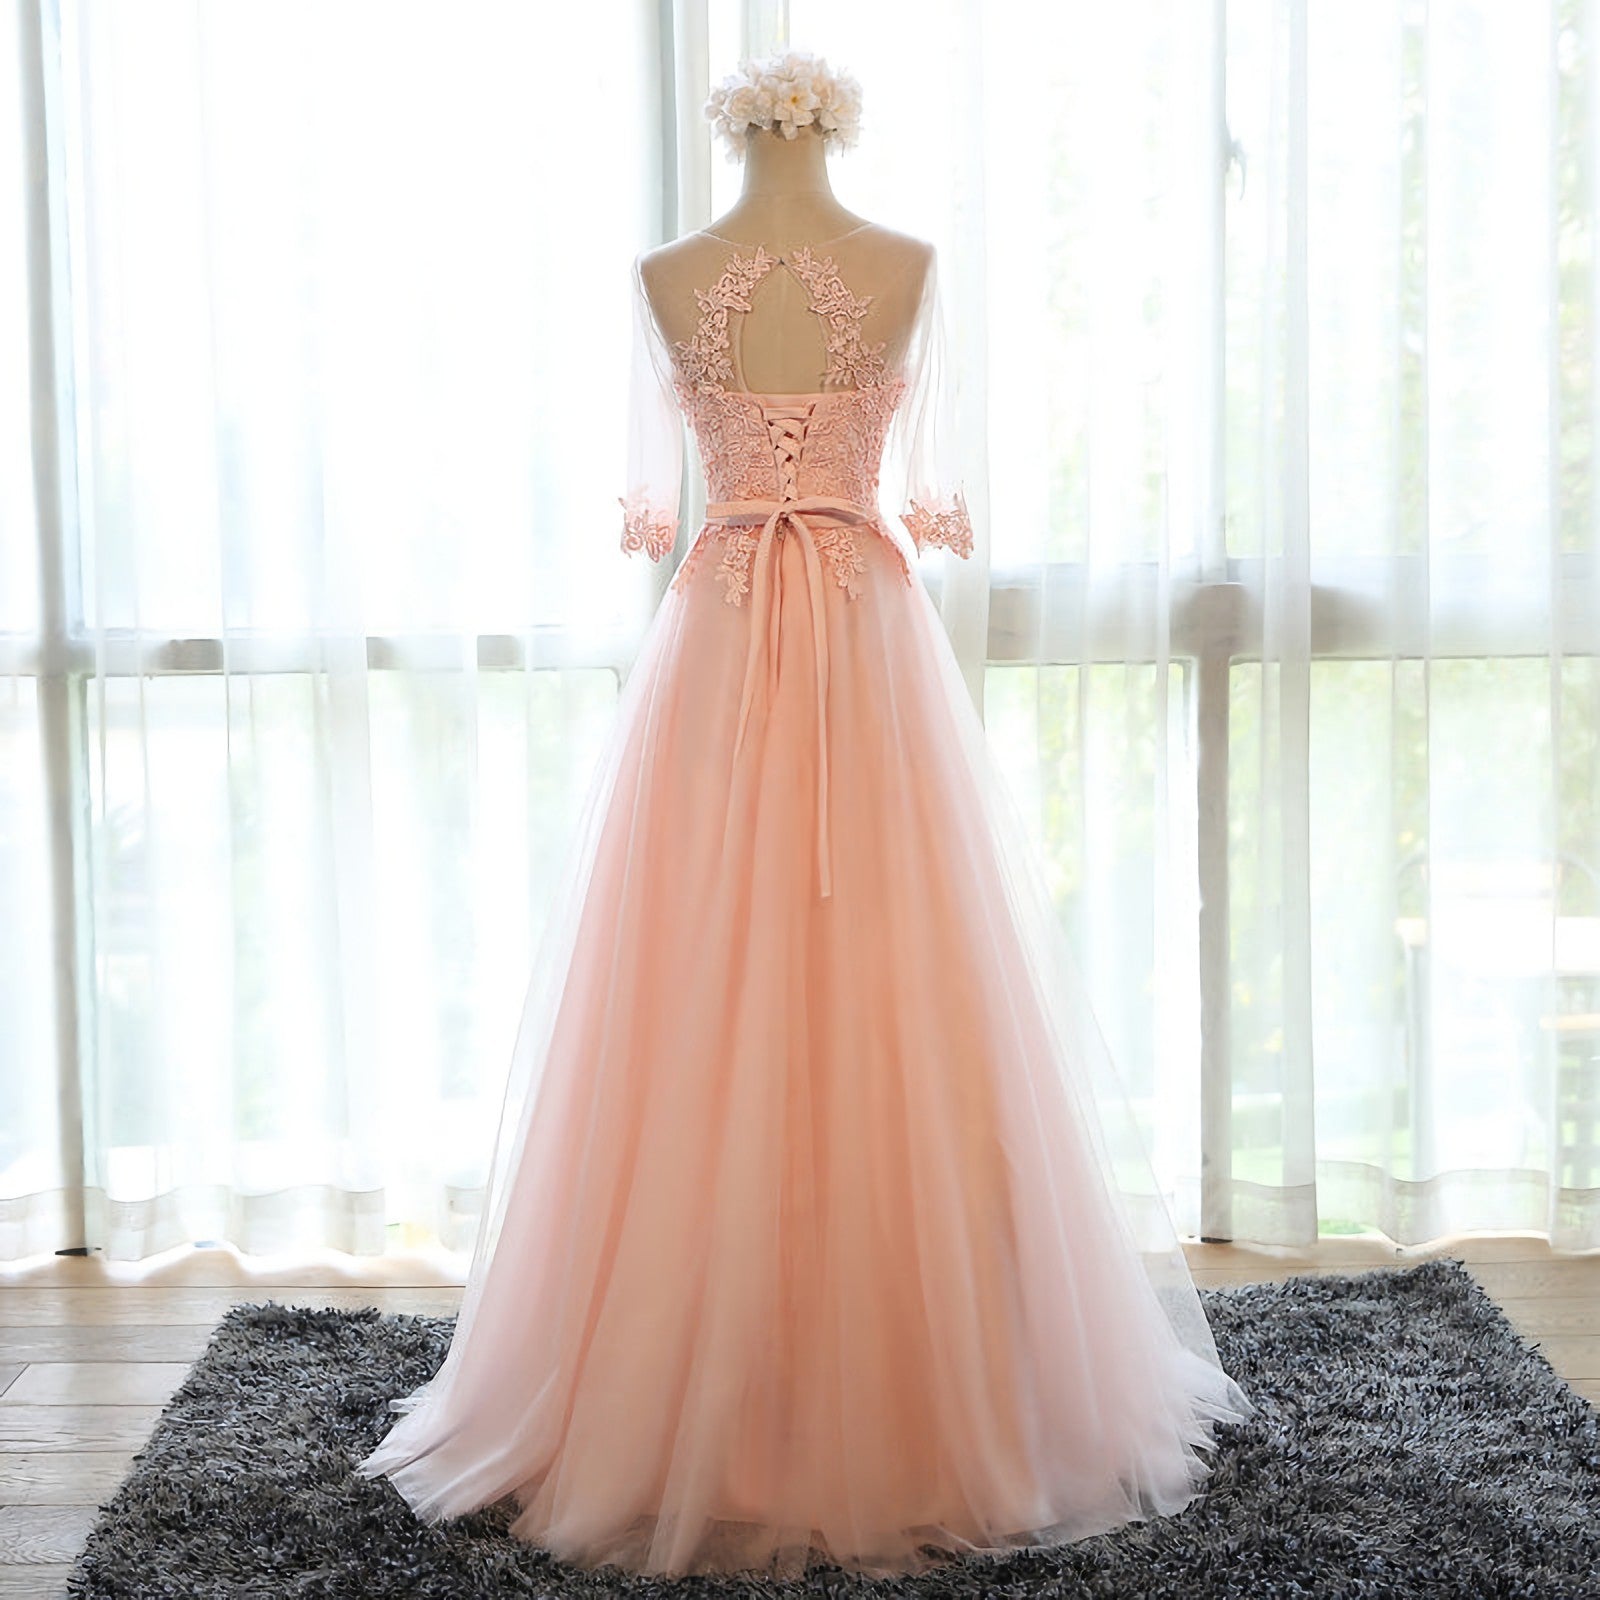 Party Dresses For Over 62S, pink chiffon long womens long Evening Dresses